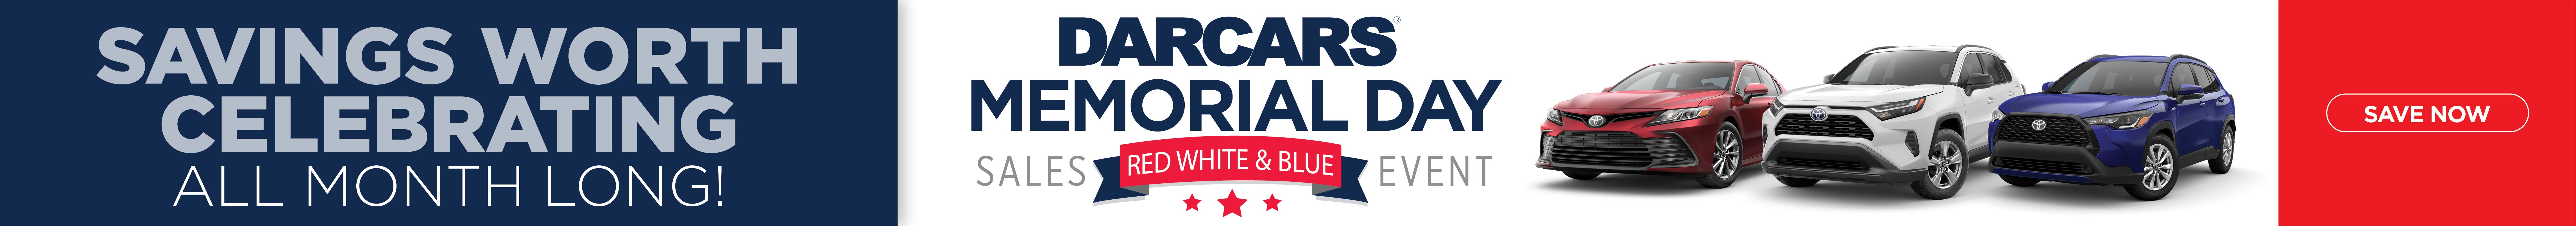 DARCARS Memorial Day Sales Event!